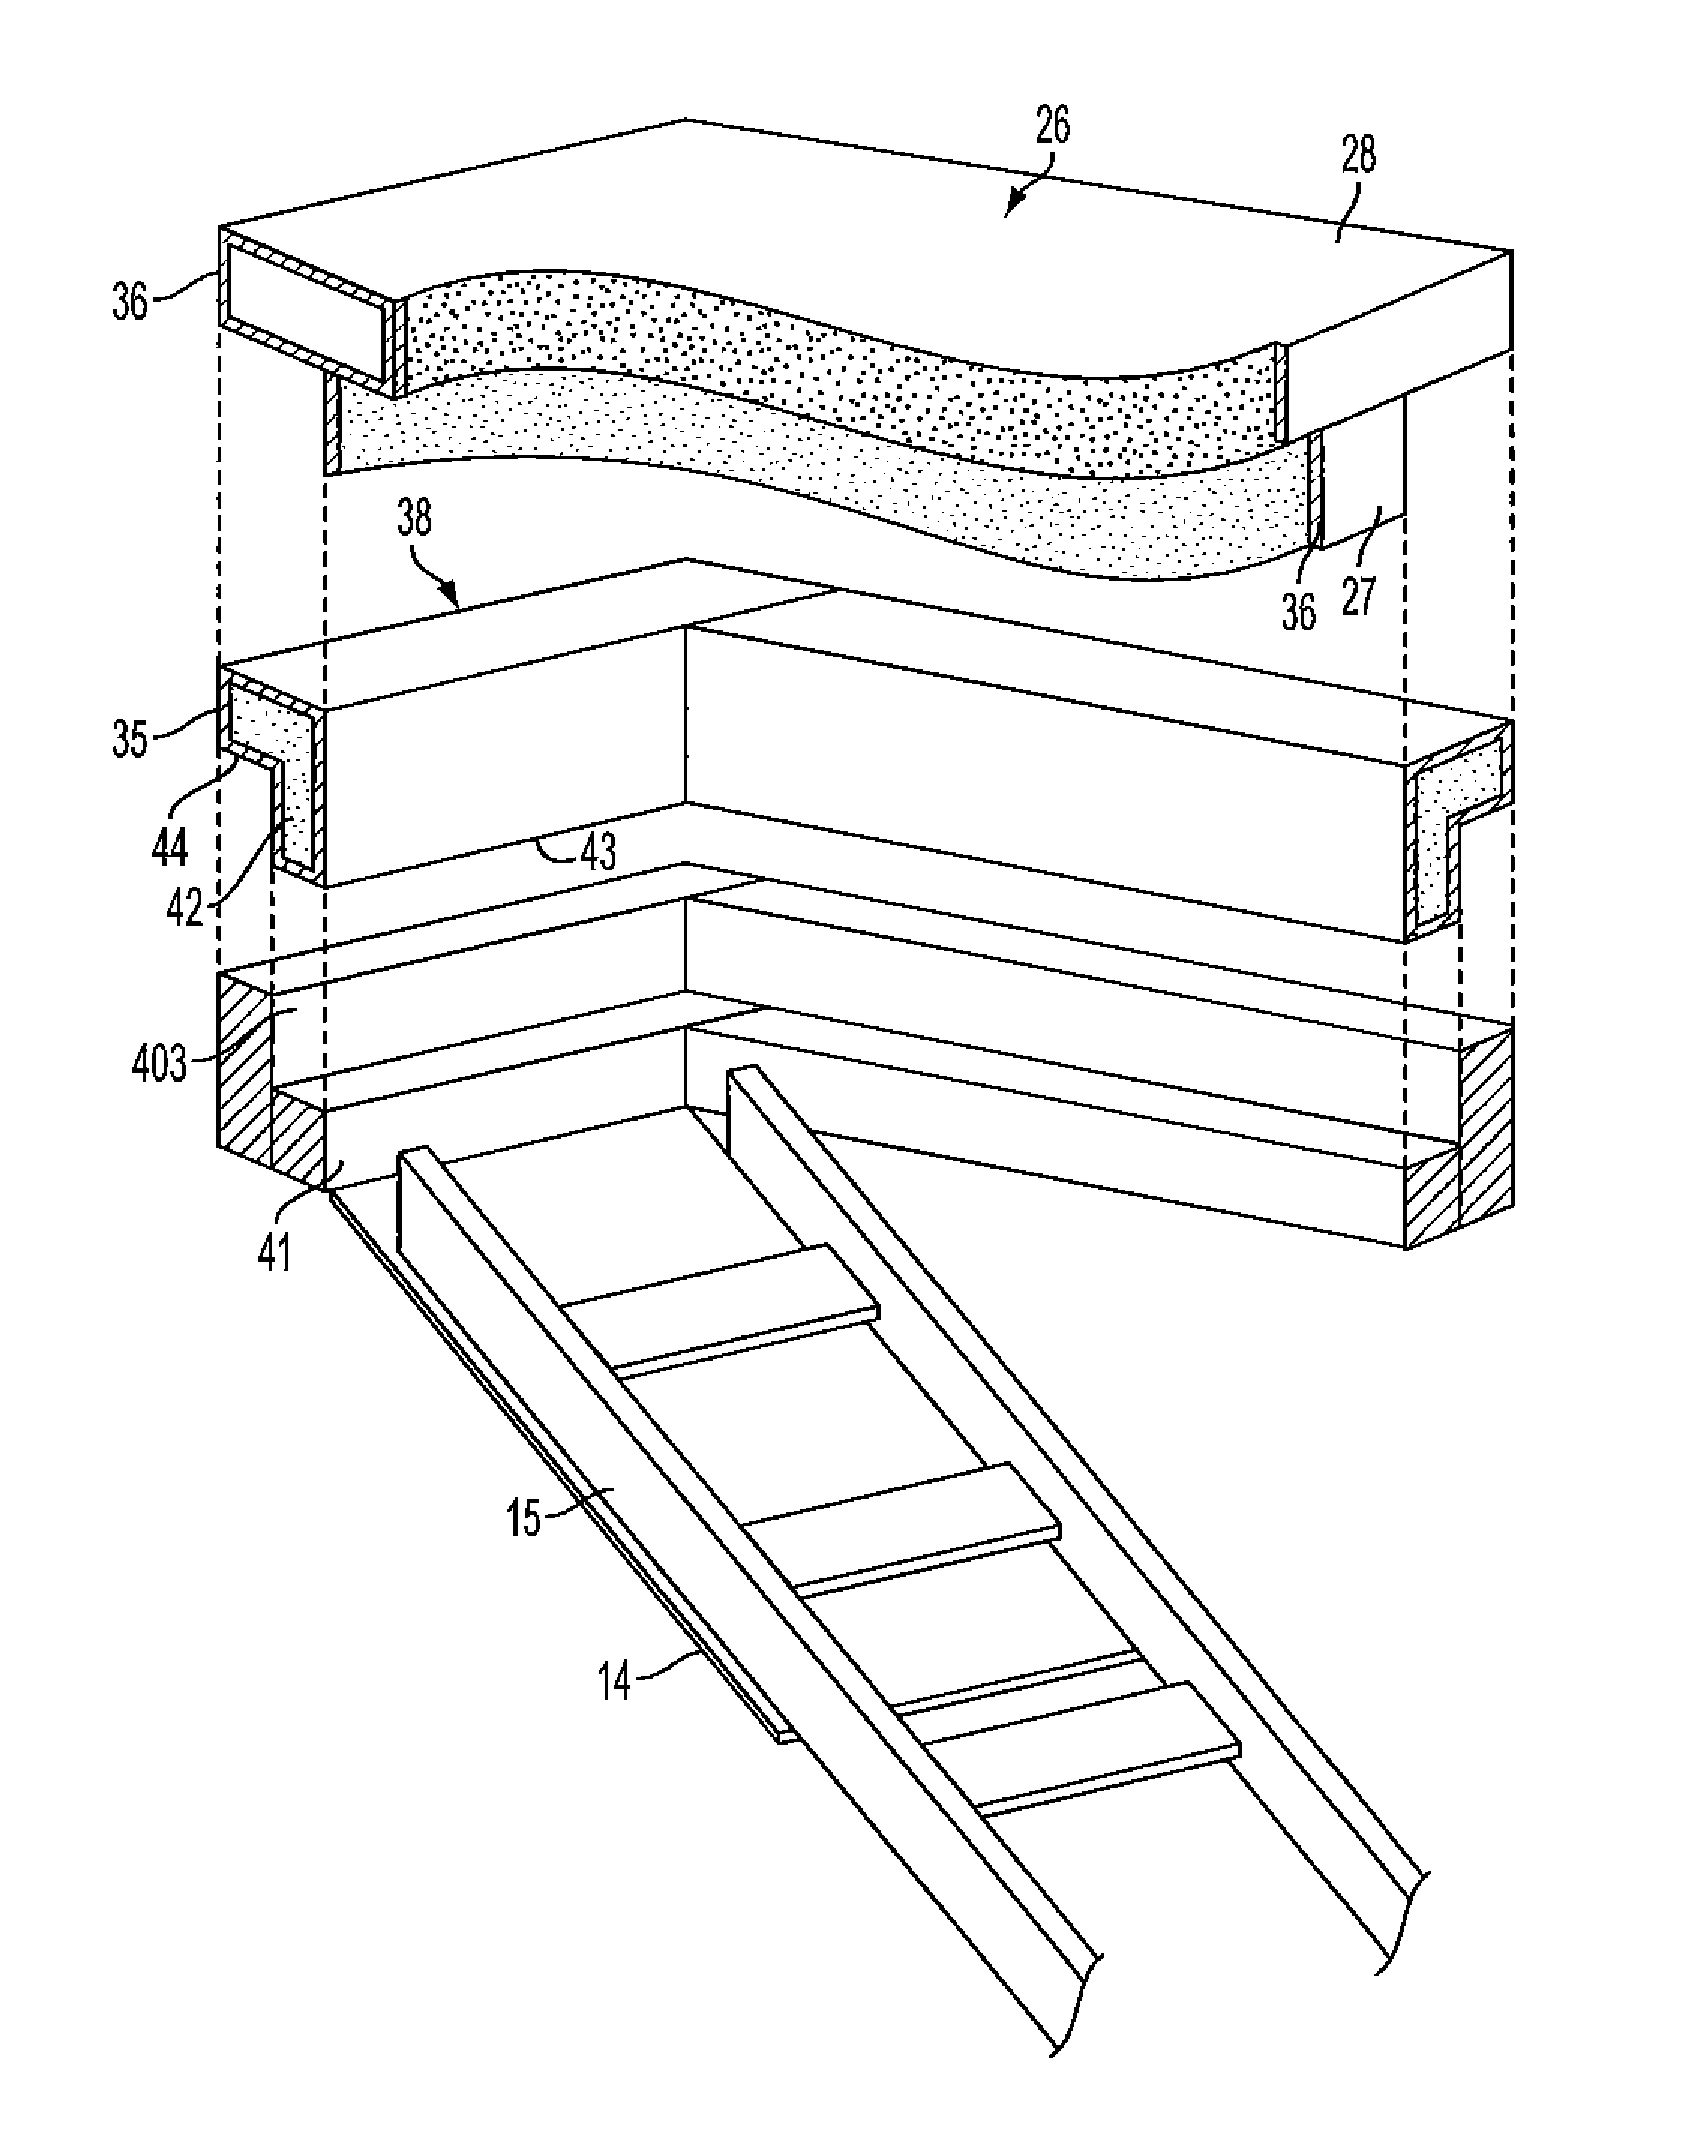 Systems and Methods for Insulating Attic Openings